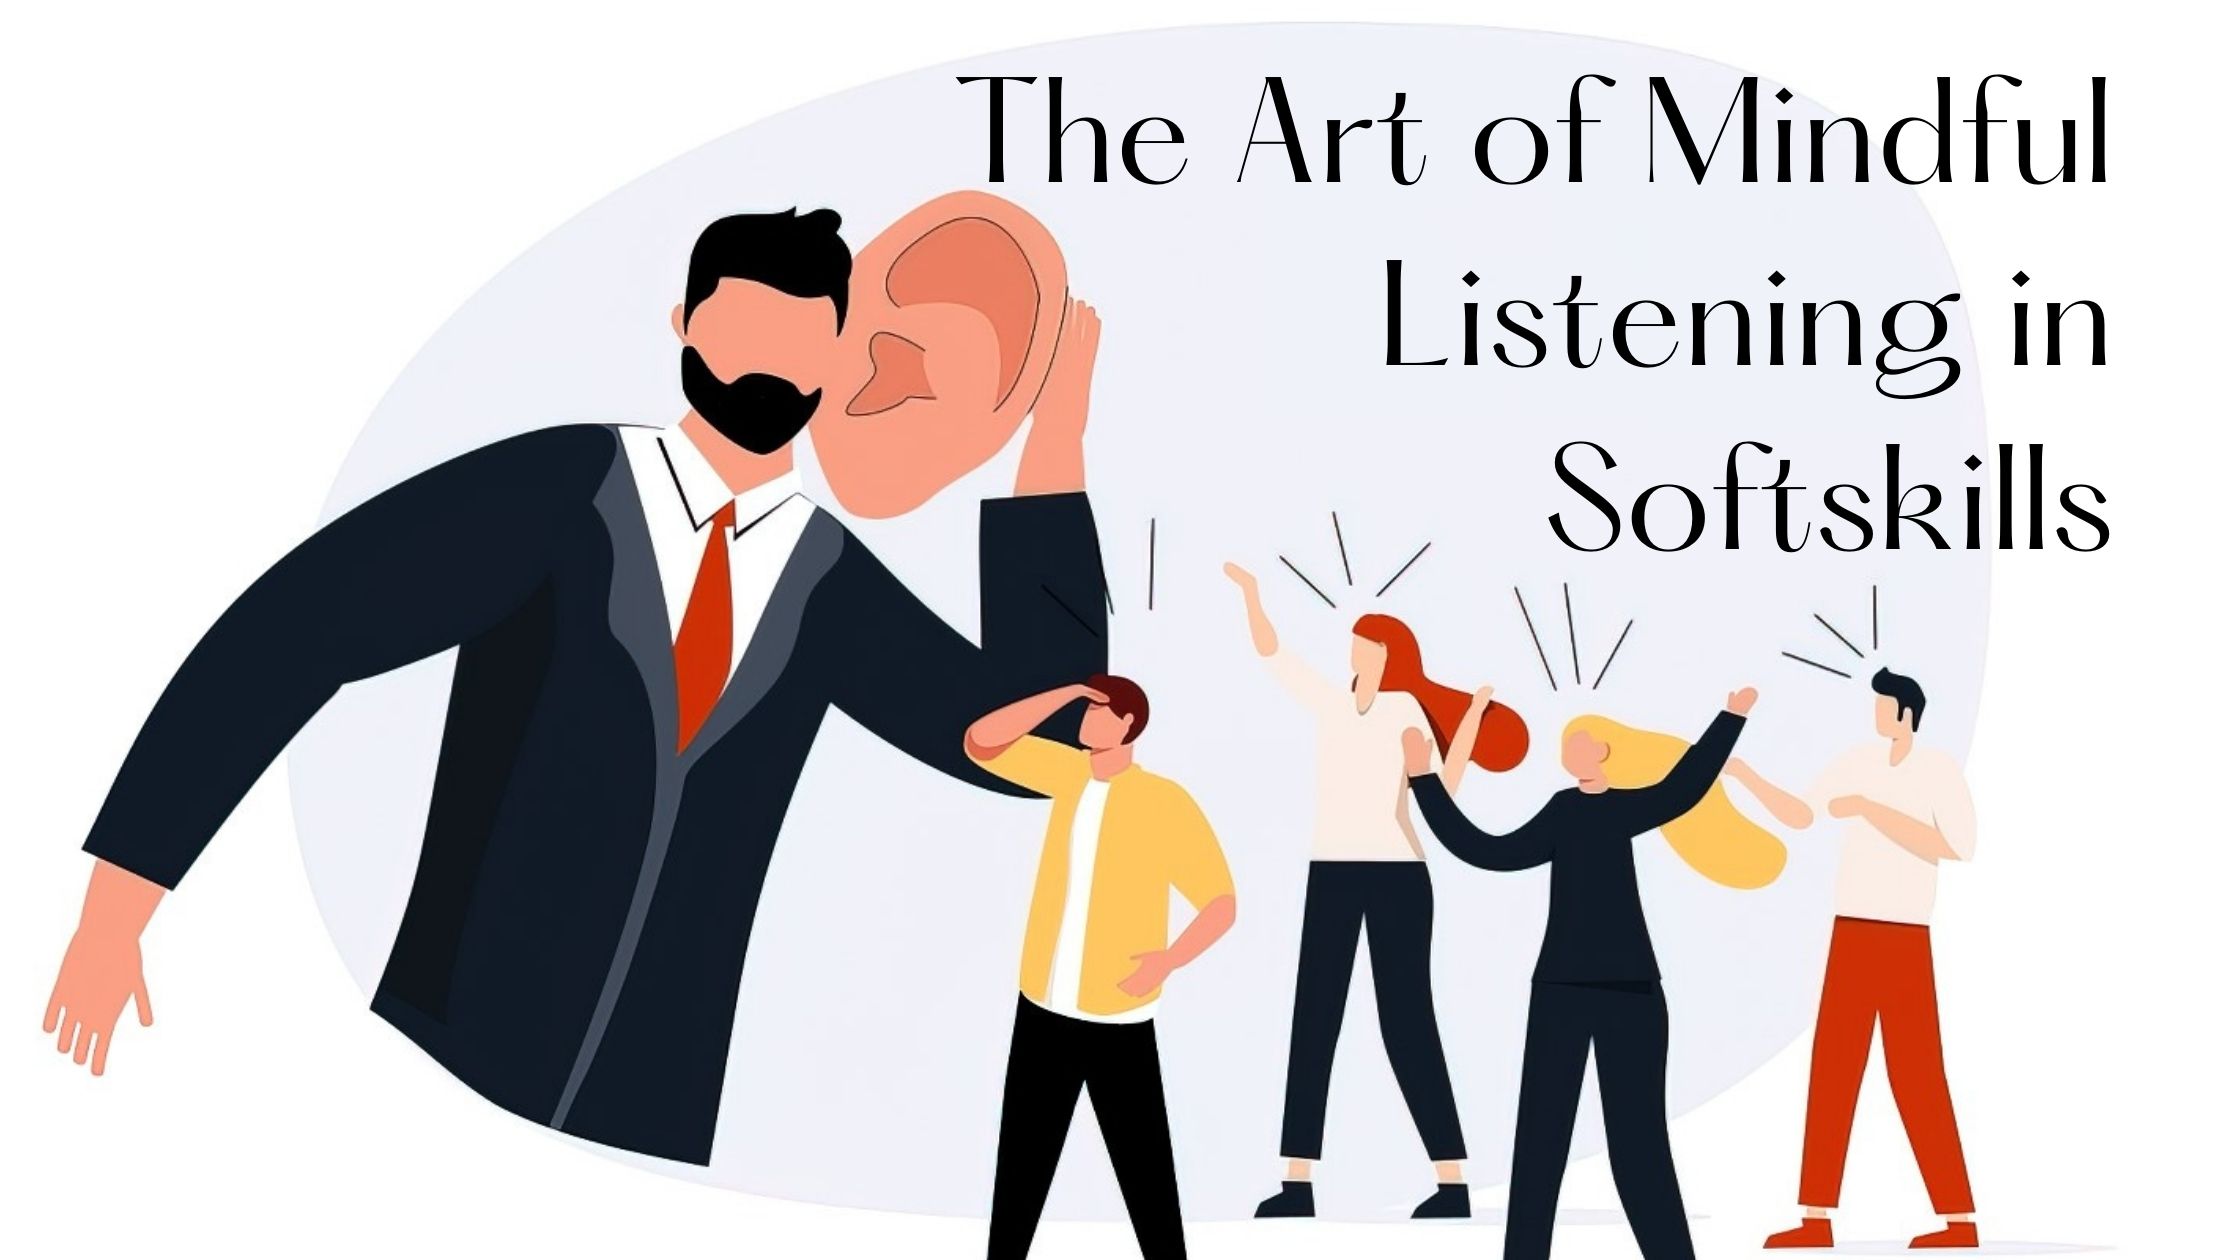 The Art of Mindful Listening in Softskills